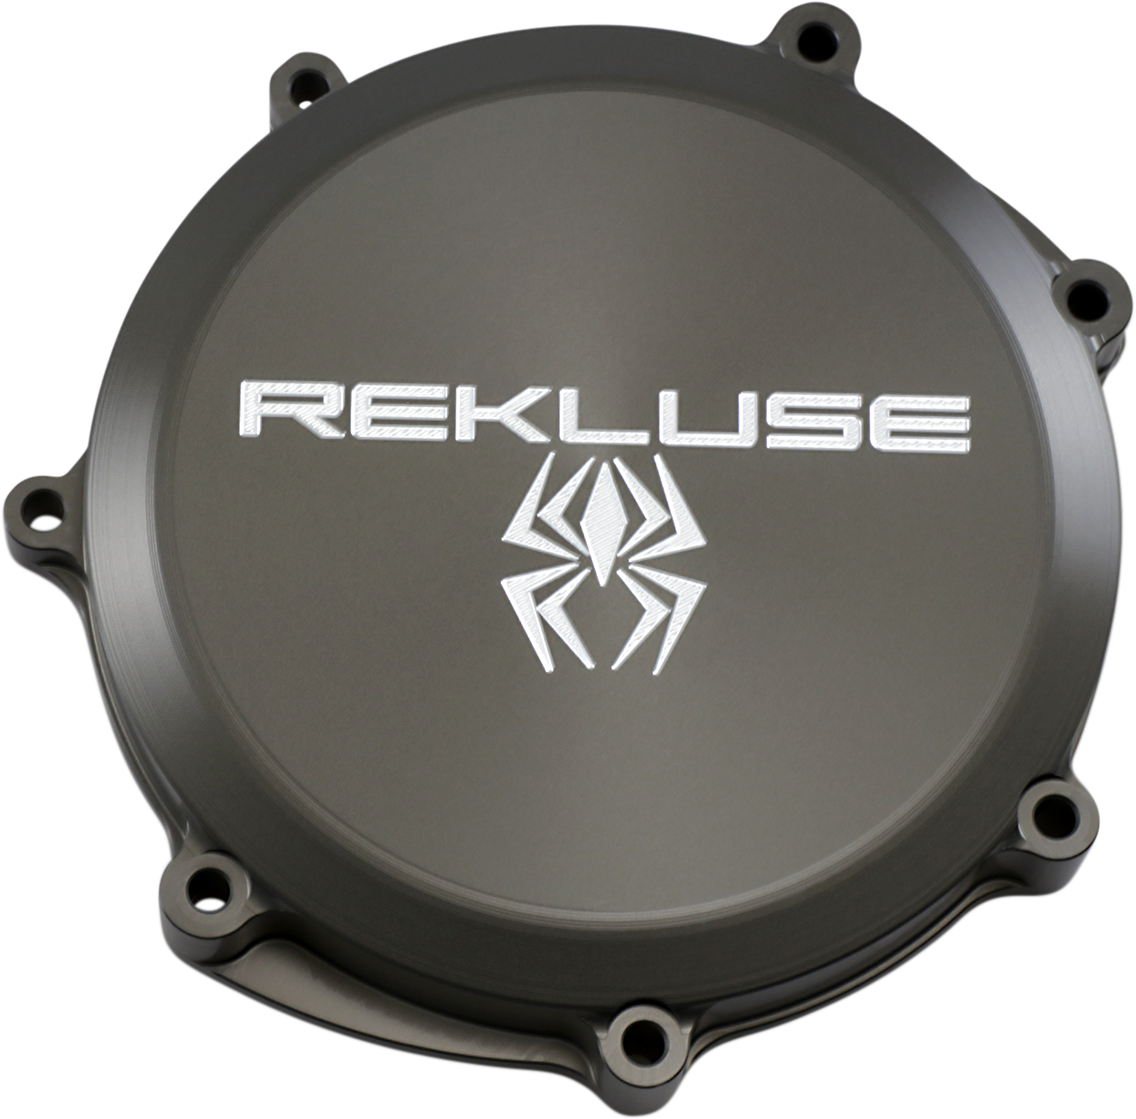 REKLUSE Clutch Cover - Gas Gas/Yamaha RMS-473